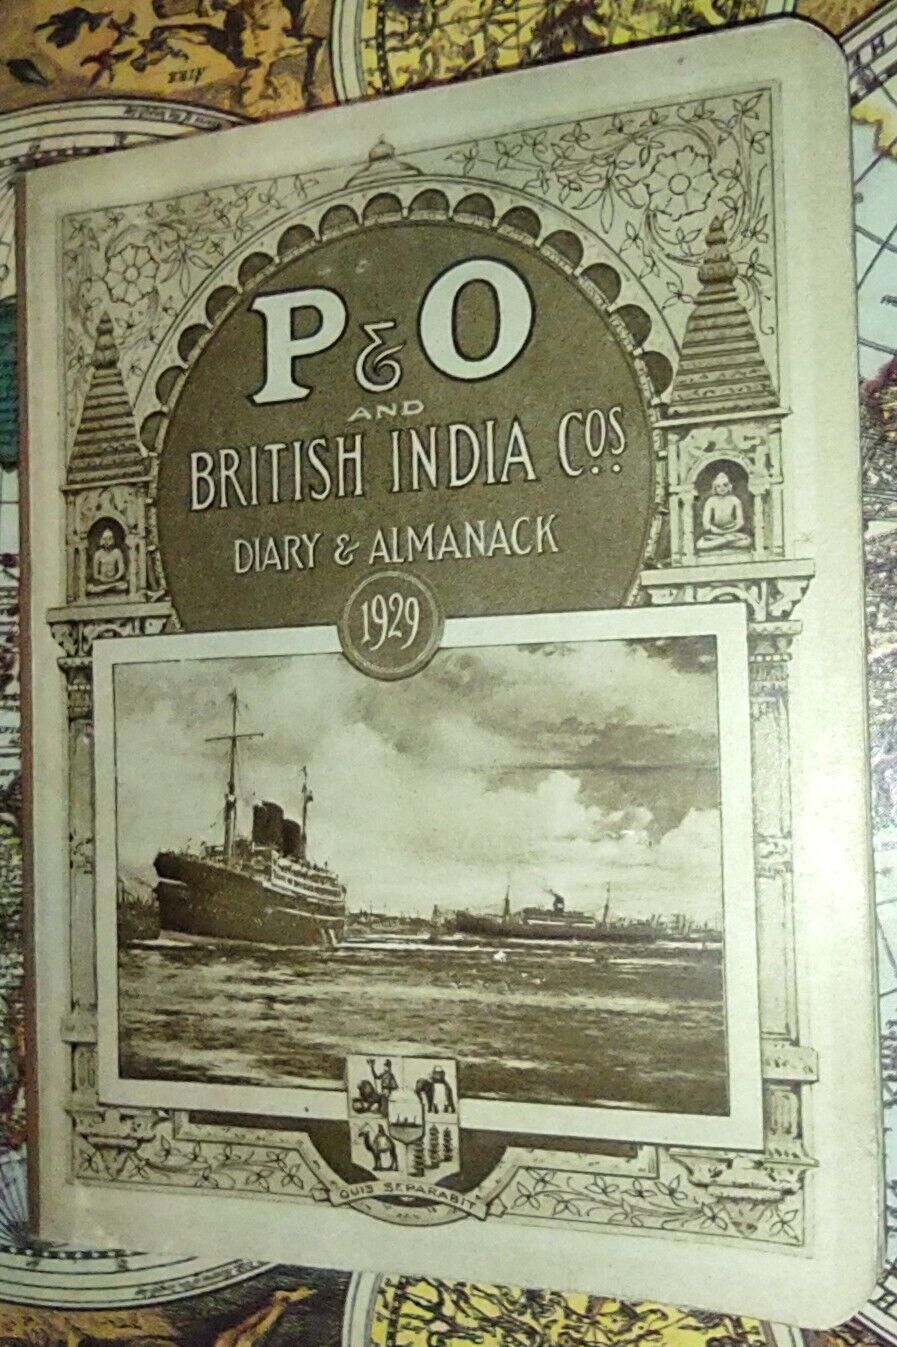 P&O And British India Co\'s Diary And Almanack 1929. Very FINE CONDIT OCEAN LINER